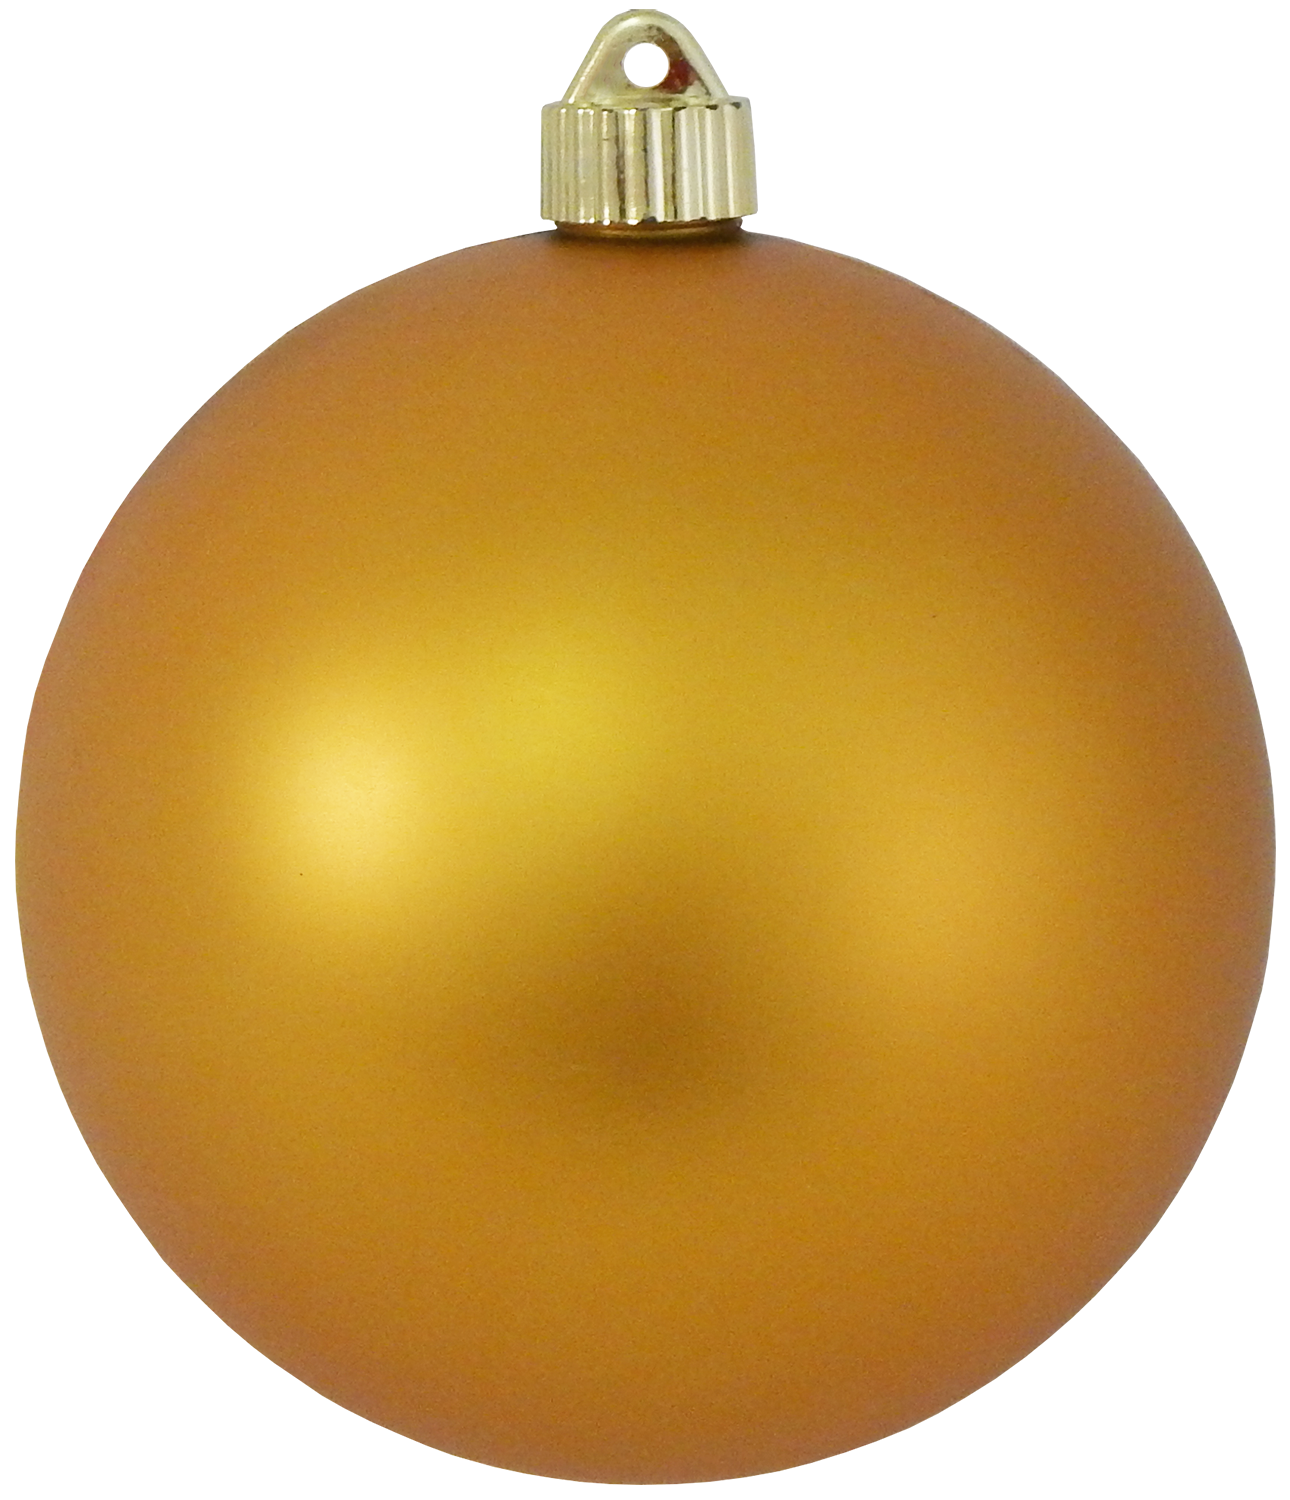 6&amp;quot; (150mm) Shatterproof Deep Gold Christmas Ball Ornament by Christmas ...